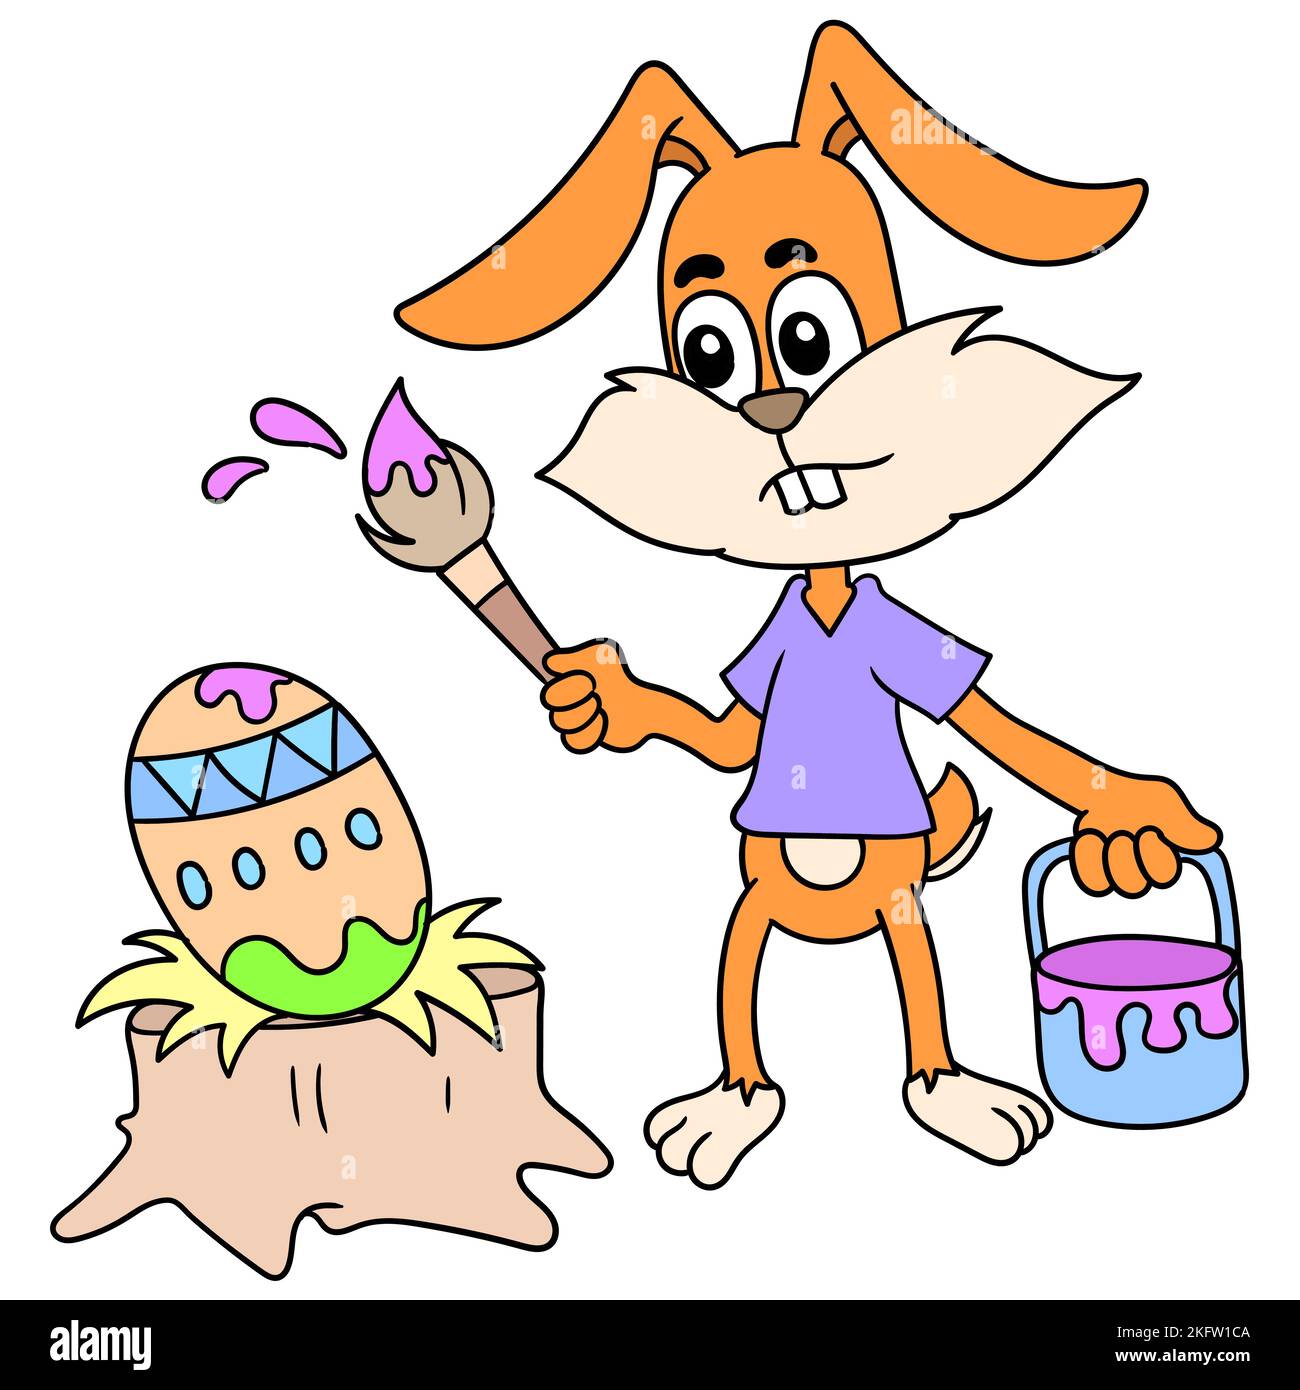 A digital illustration of a cute cartoon Easter bunny character coloring eggs on a white background Stock Vector